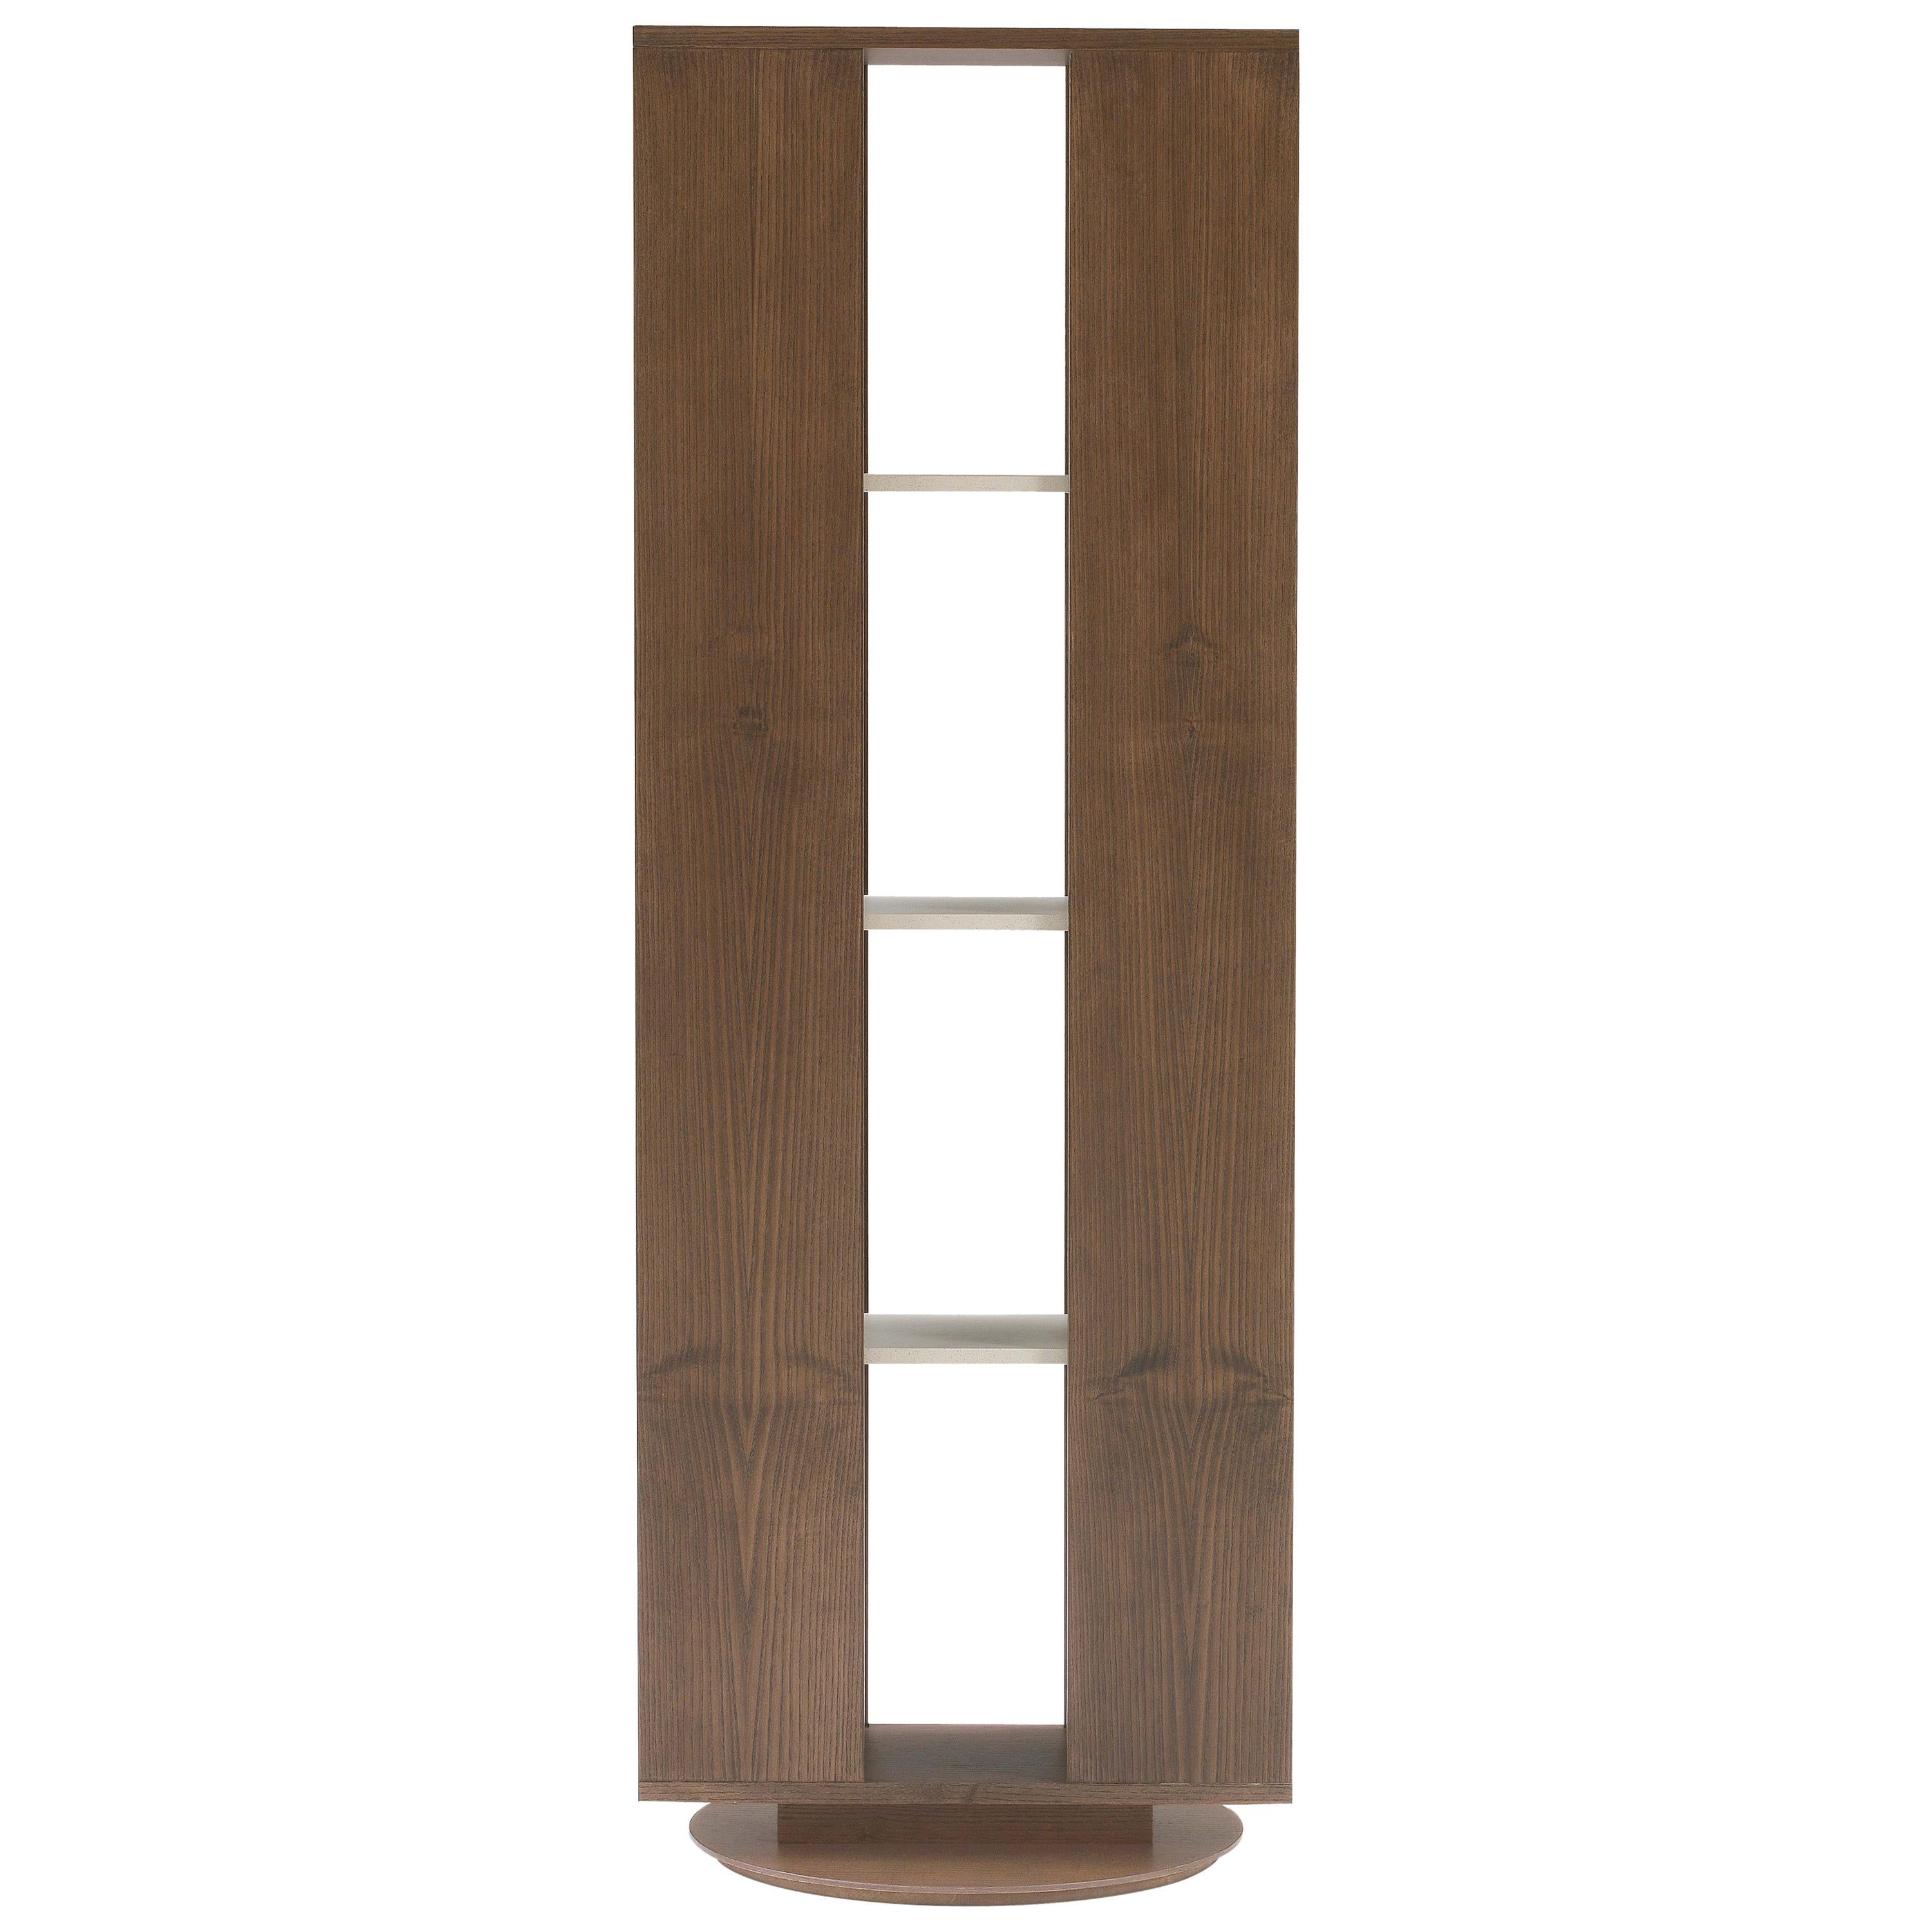 Pacini & Cappellini Trolley Large Bookends in Walnut by Fabio Rebosio For Sale